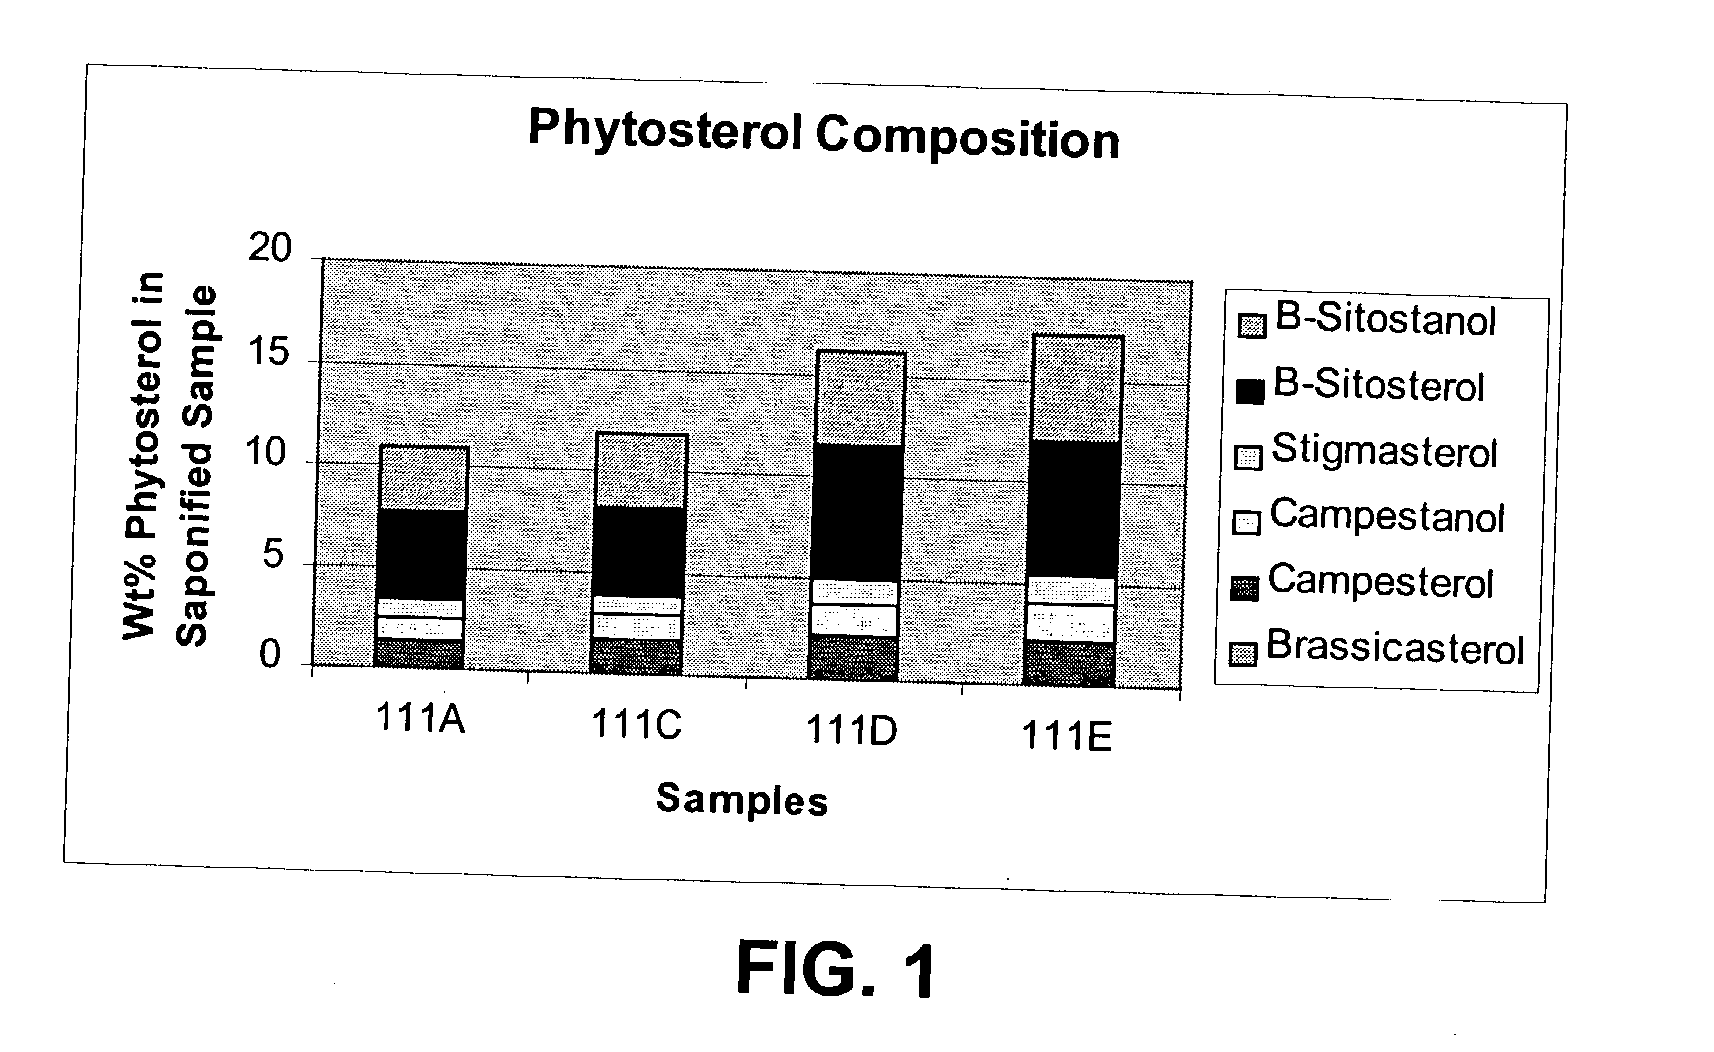 Extraction of phytosterols from corn fiber using green solvents